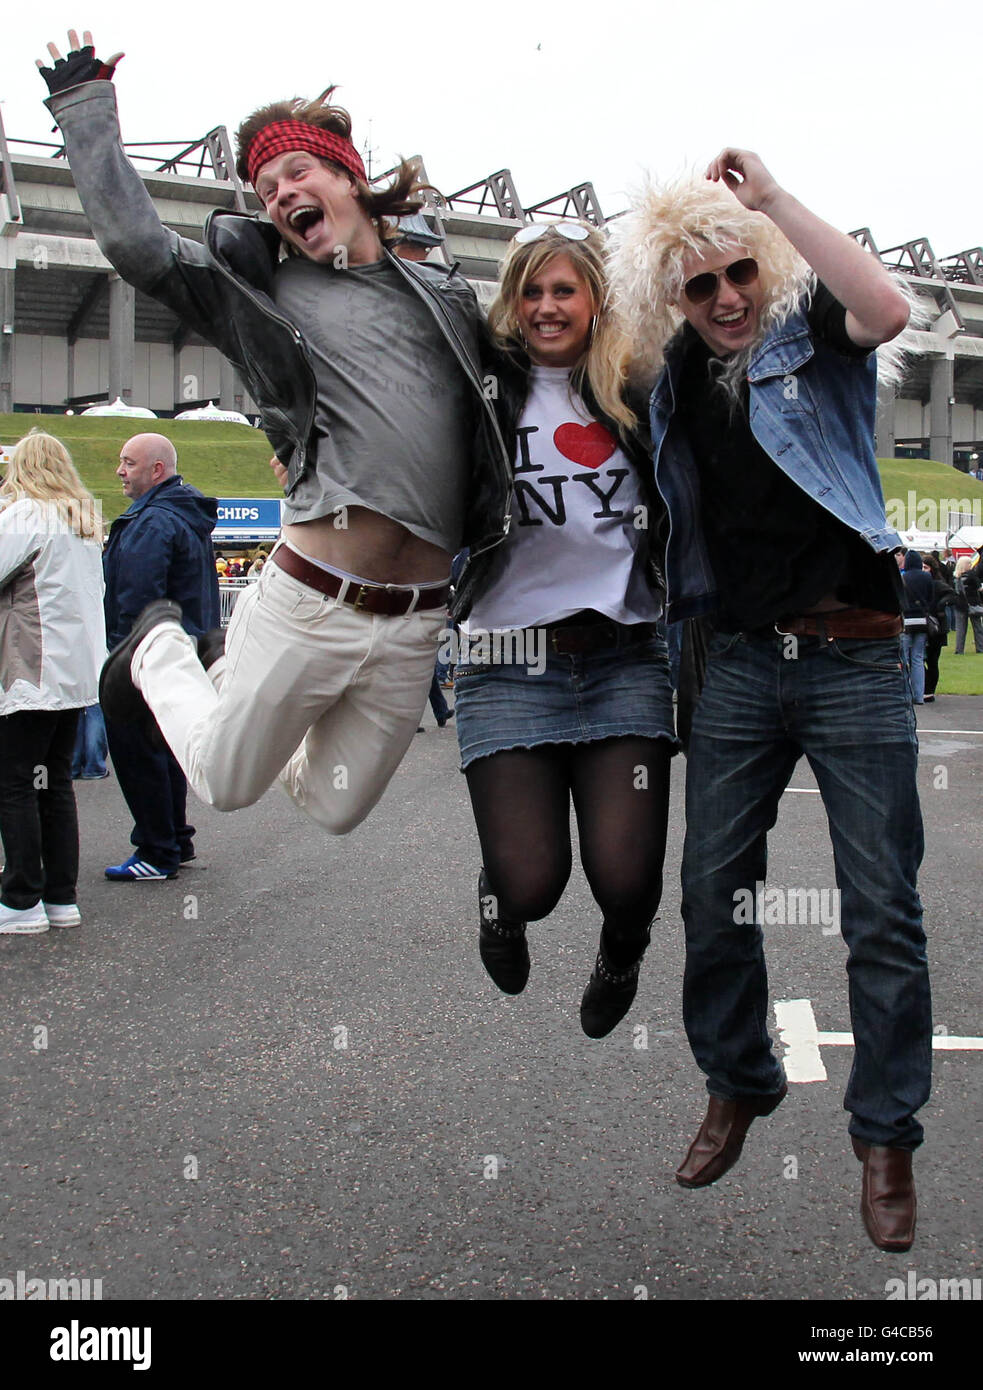 Bon Jovi gig - Murrayfield. Bon Jovi Fans (from left) Wim Stevenston, Laura McGhie and James Forster get ready for the gig at Murrayfield Stock Photo